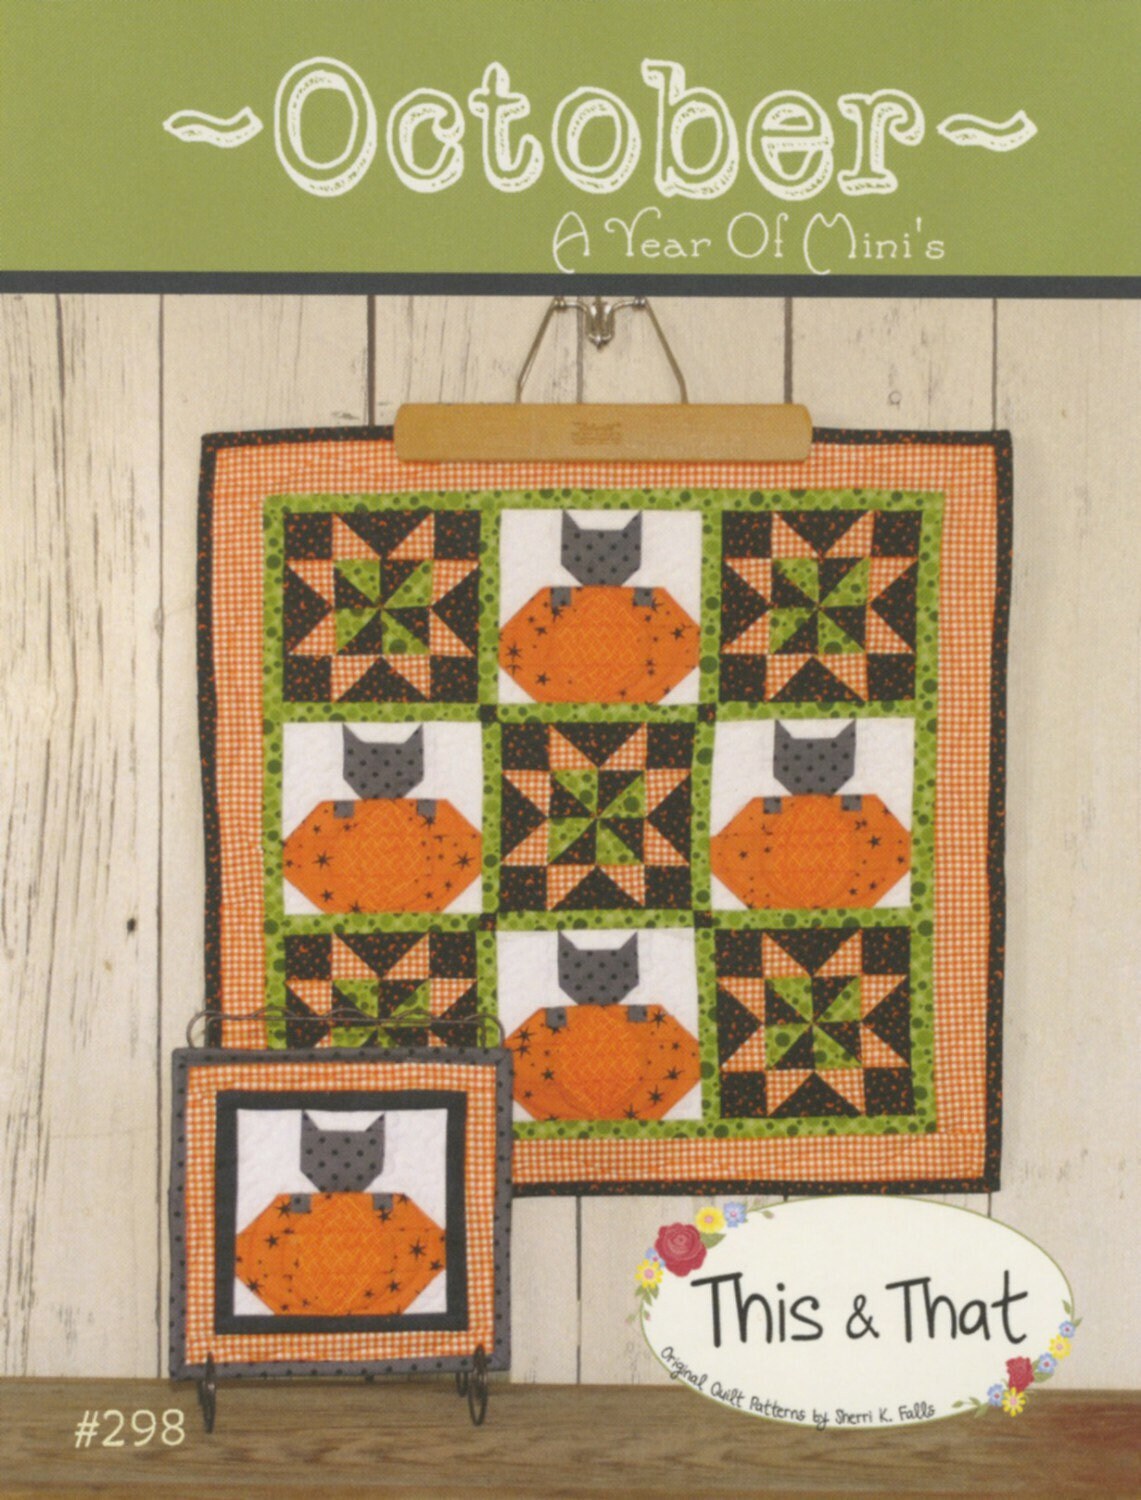 A Year of Minis - October Mini Quilt Pattern - This & That - Sherri Falls